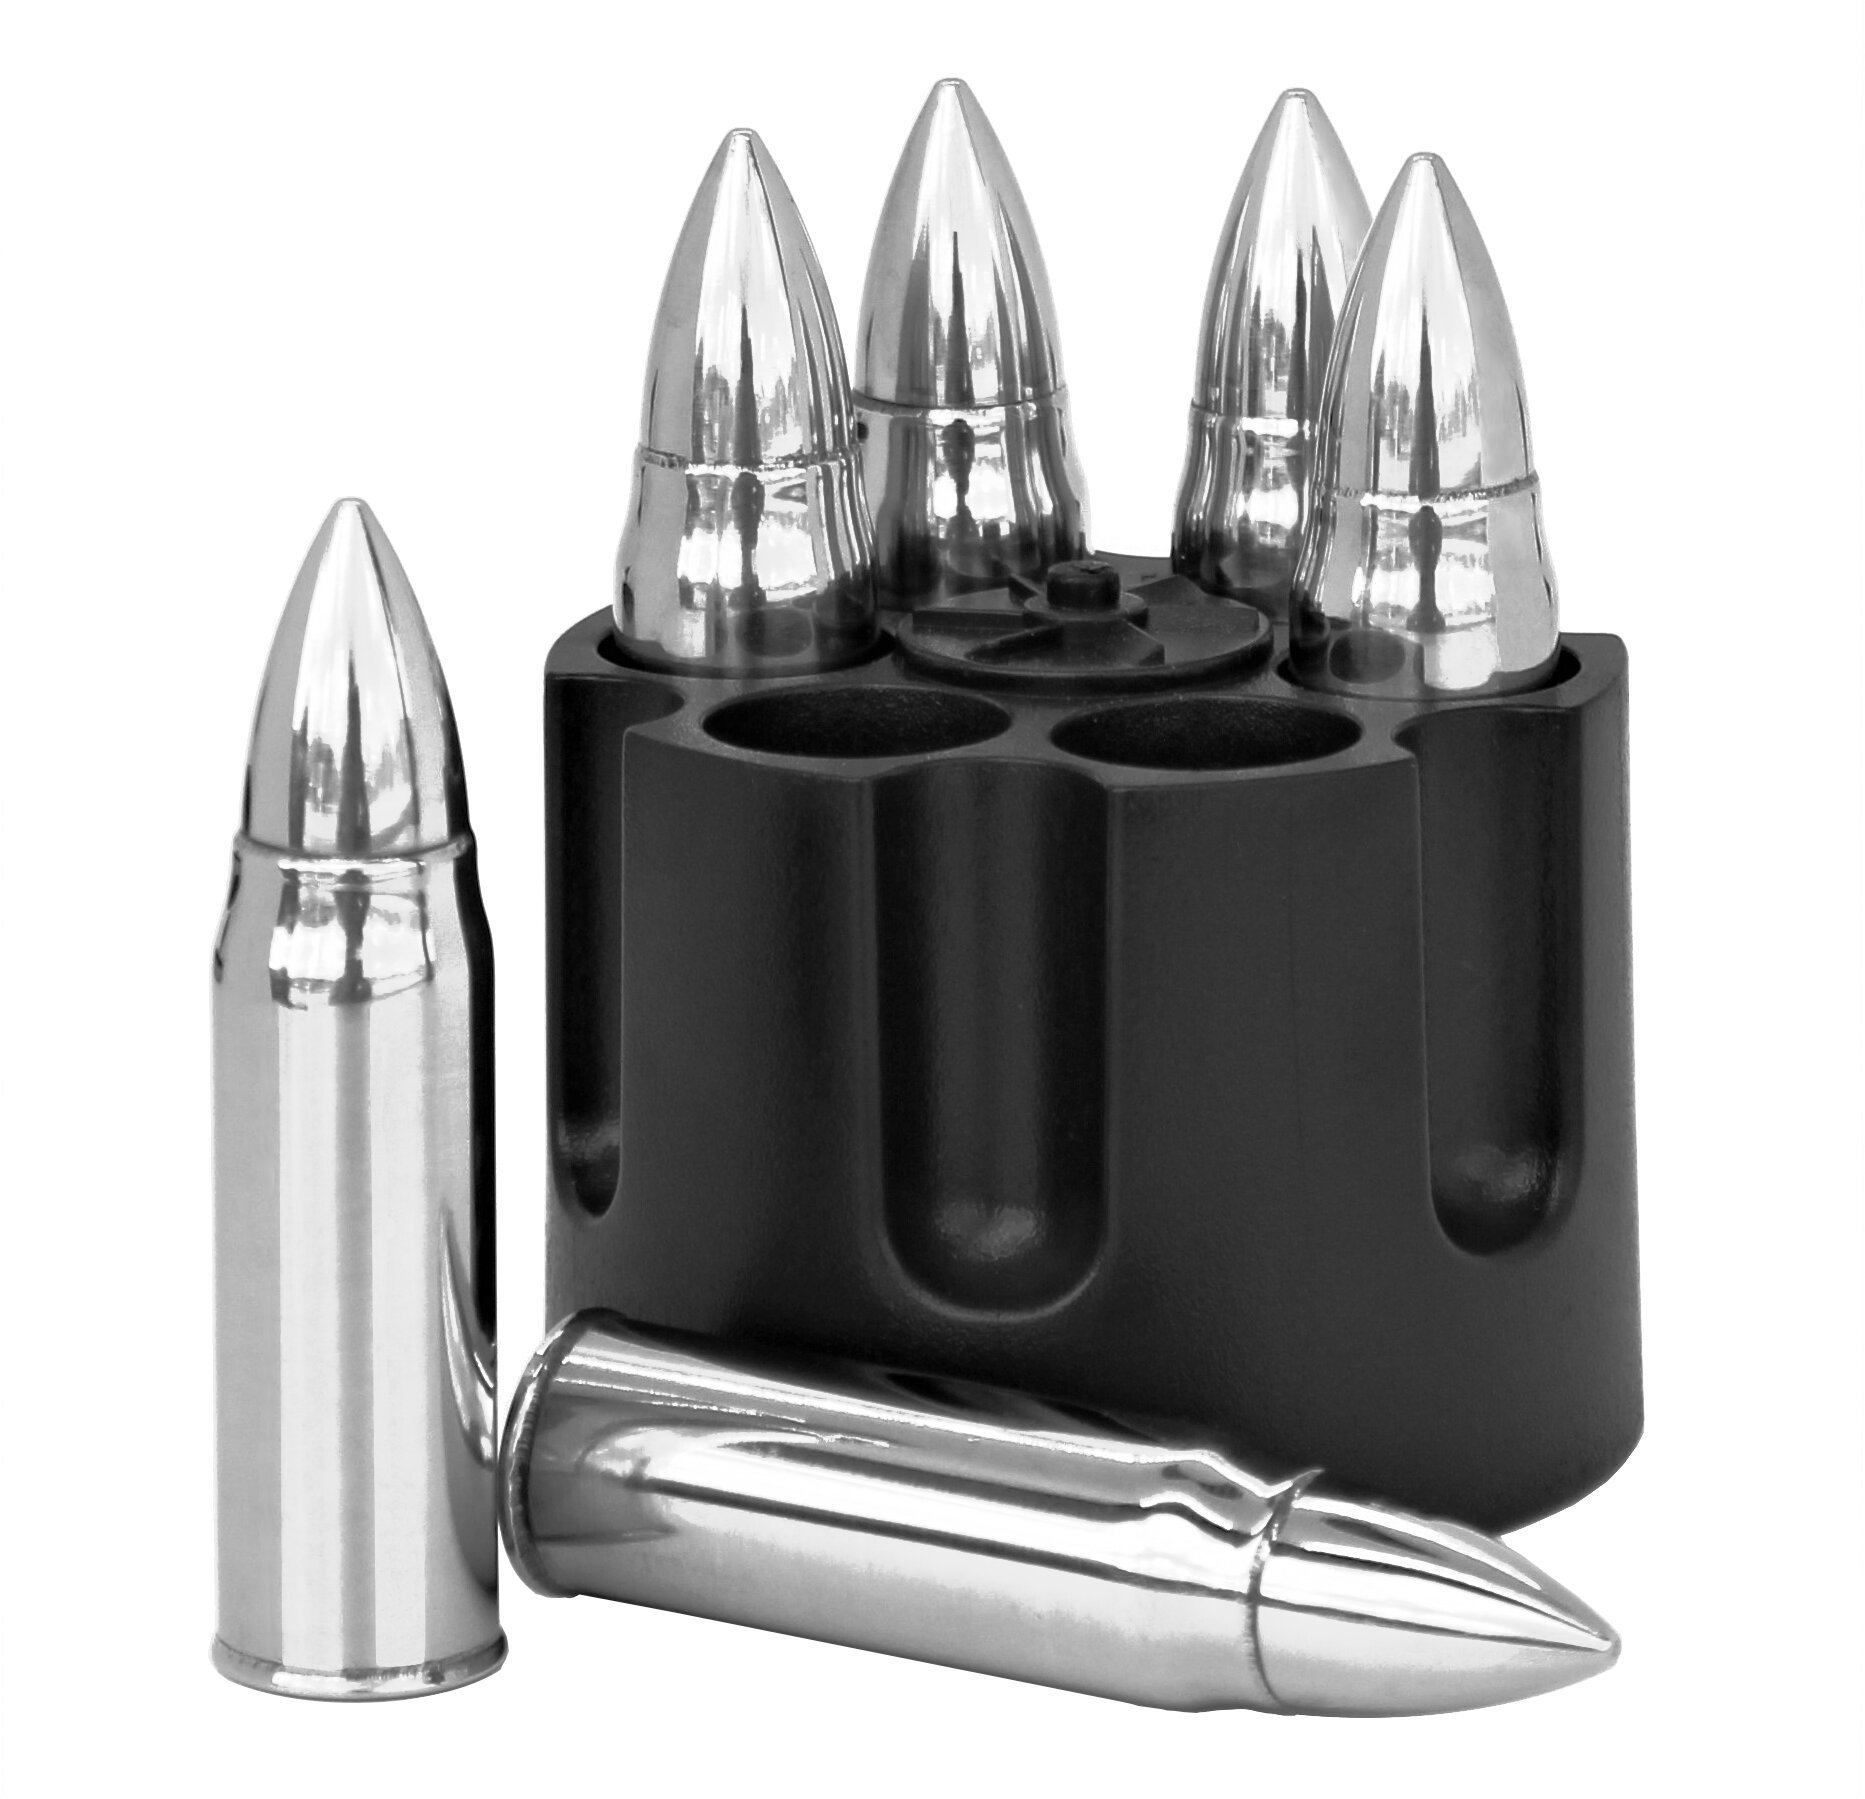 6 pcs Ice Cube Set Whiskey Bullet Stones Stainless Steel Chilling